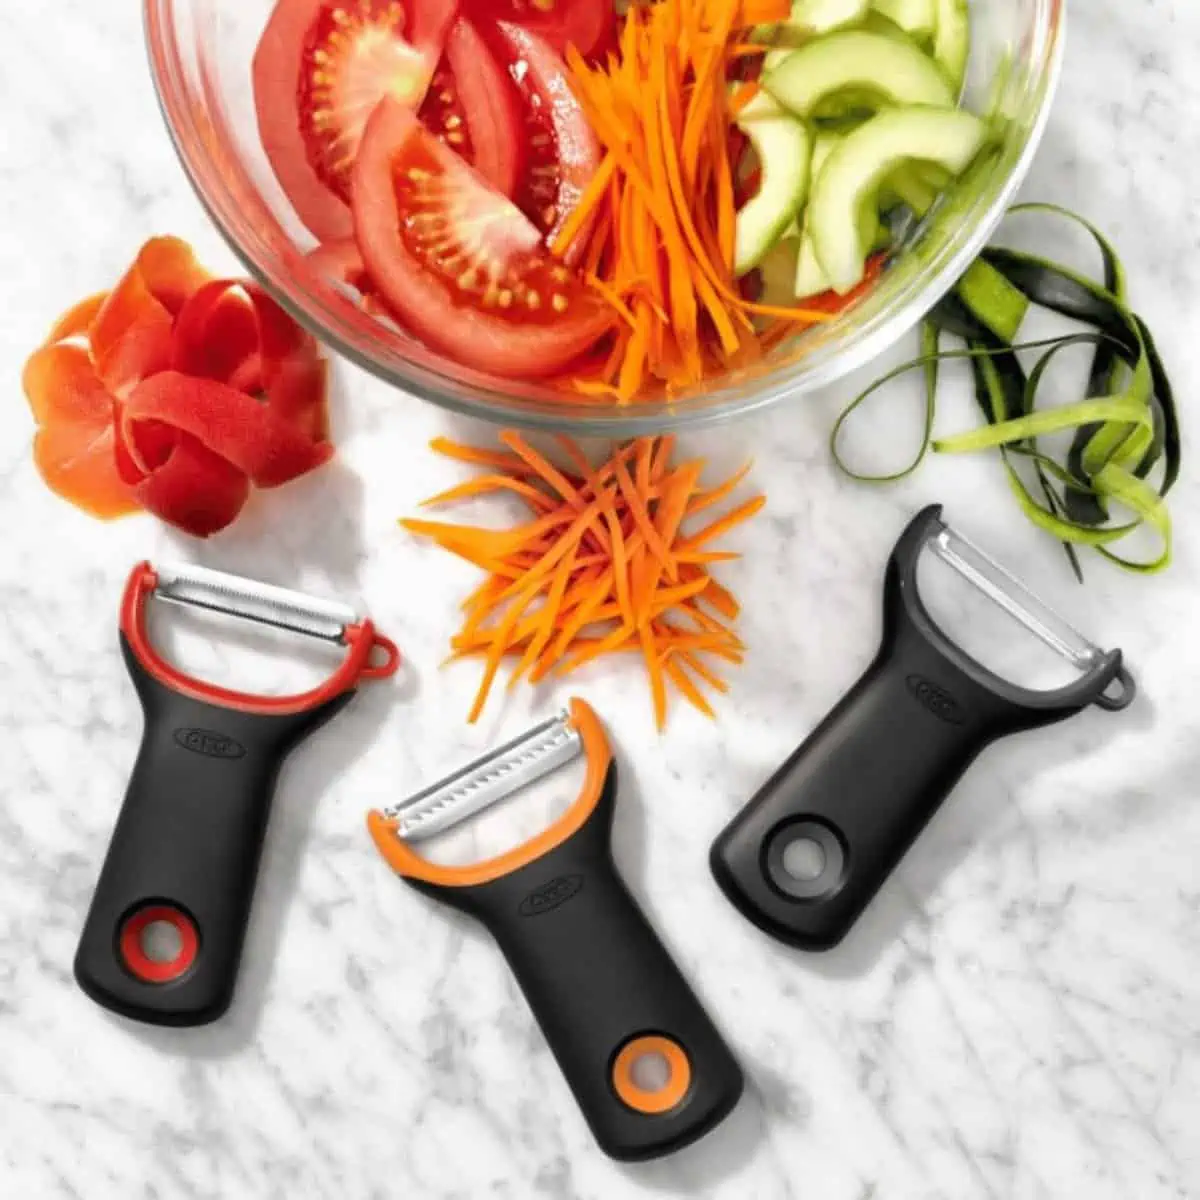 3 different types of peelers with peeled vegetable examples above them and a bowl of cut veggies on top.